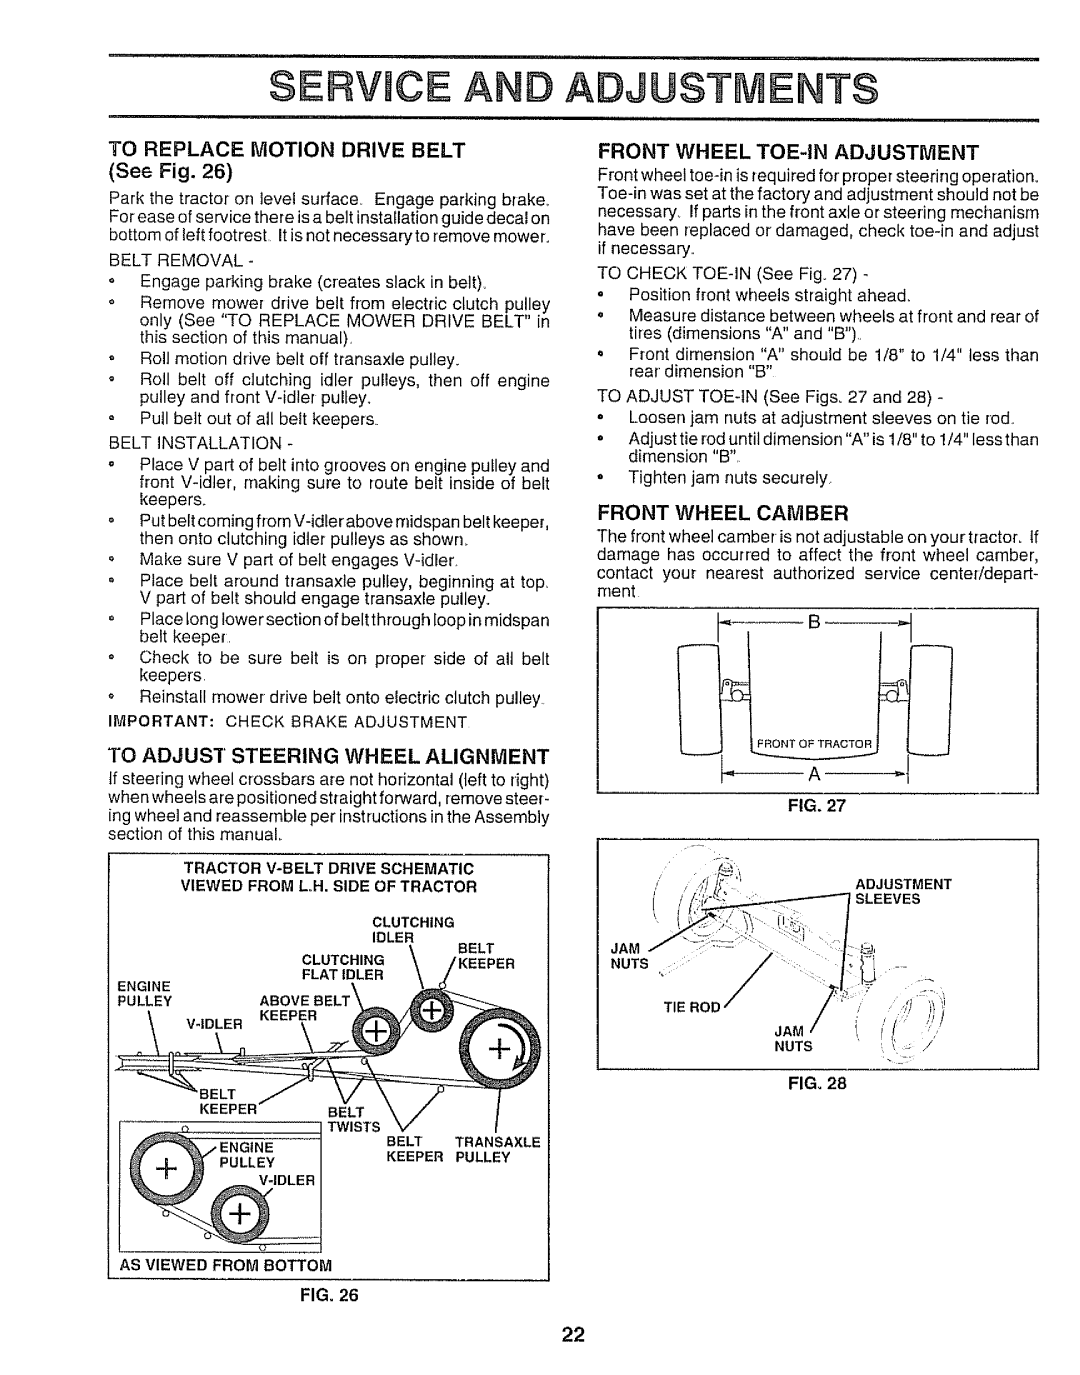 Sears 917.250551 manual Service And Adjustments, To Replace Motion Drive Belt, To Adjust Steering Wheel Alignment, See Fig 